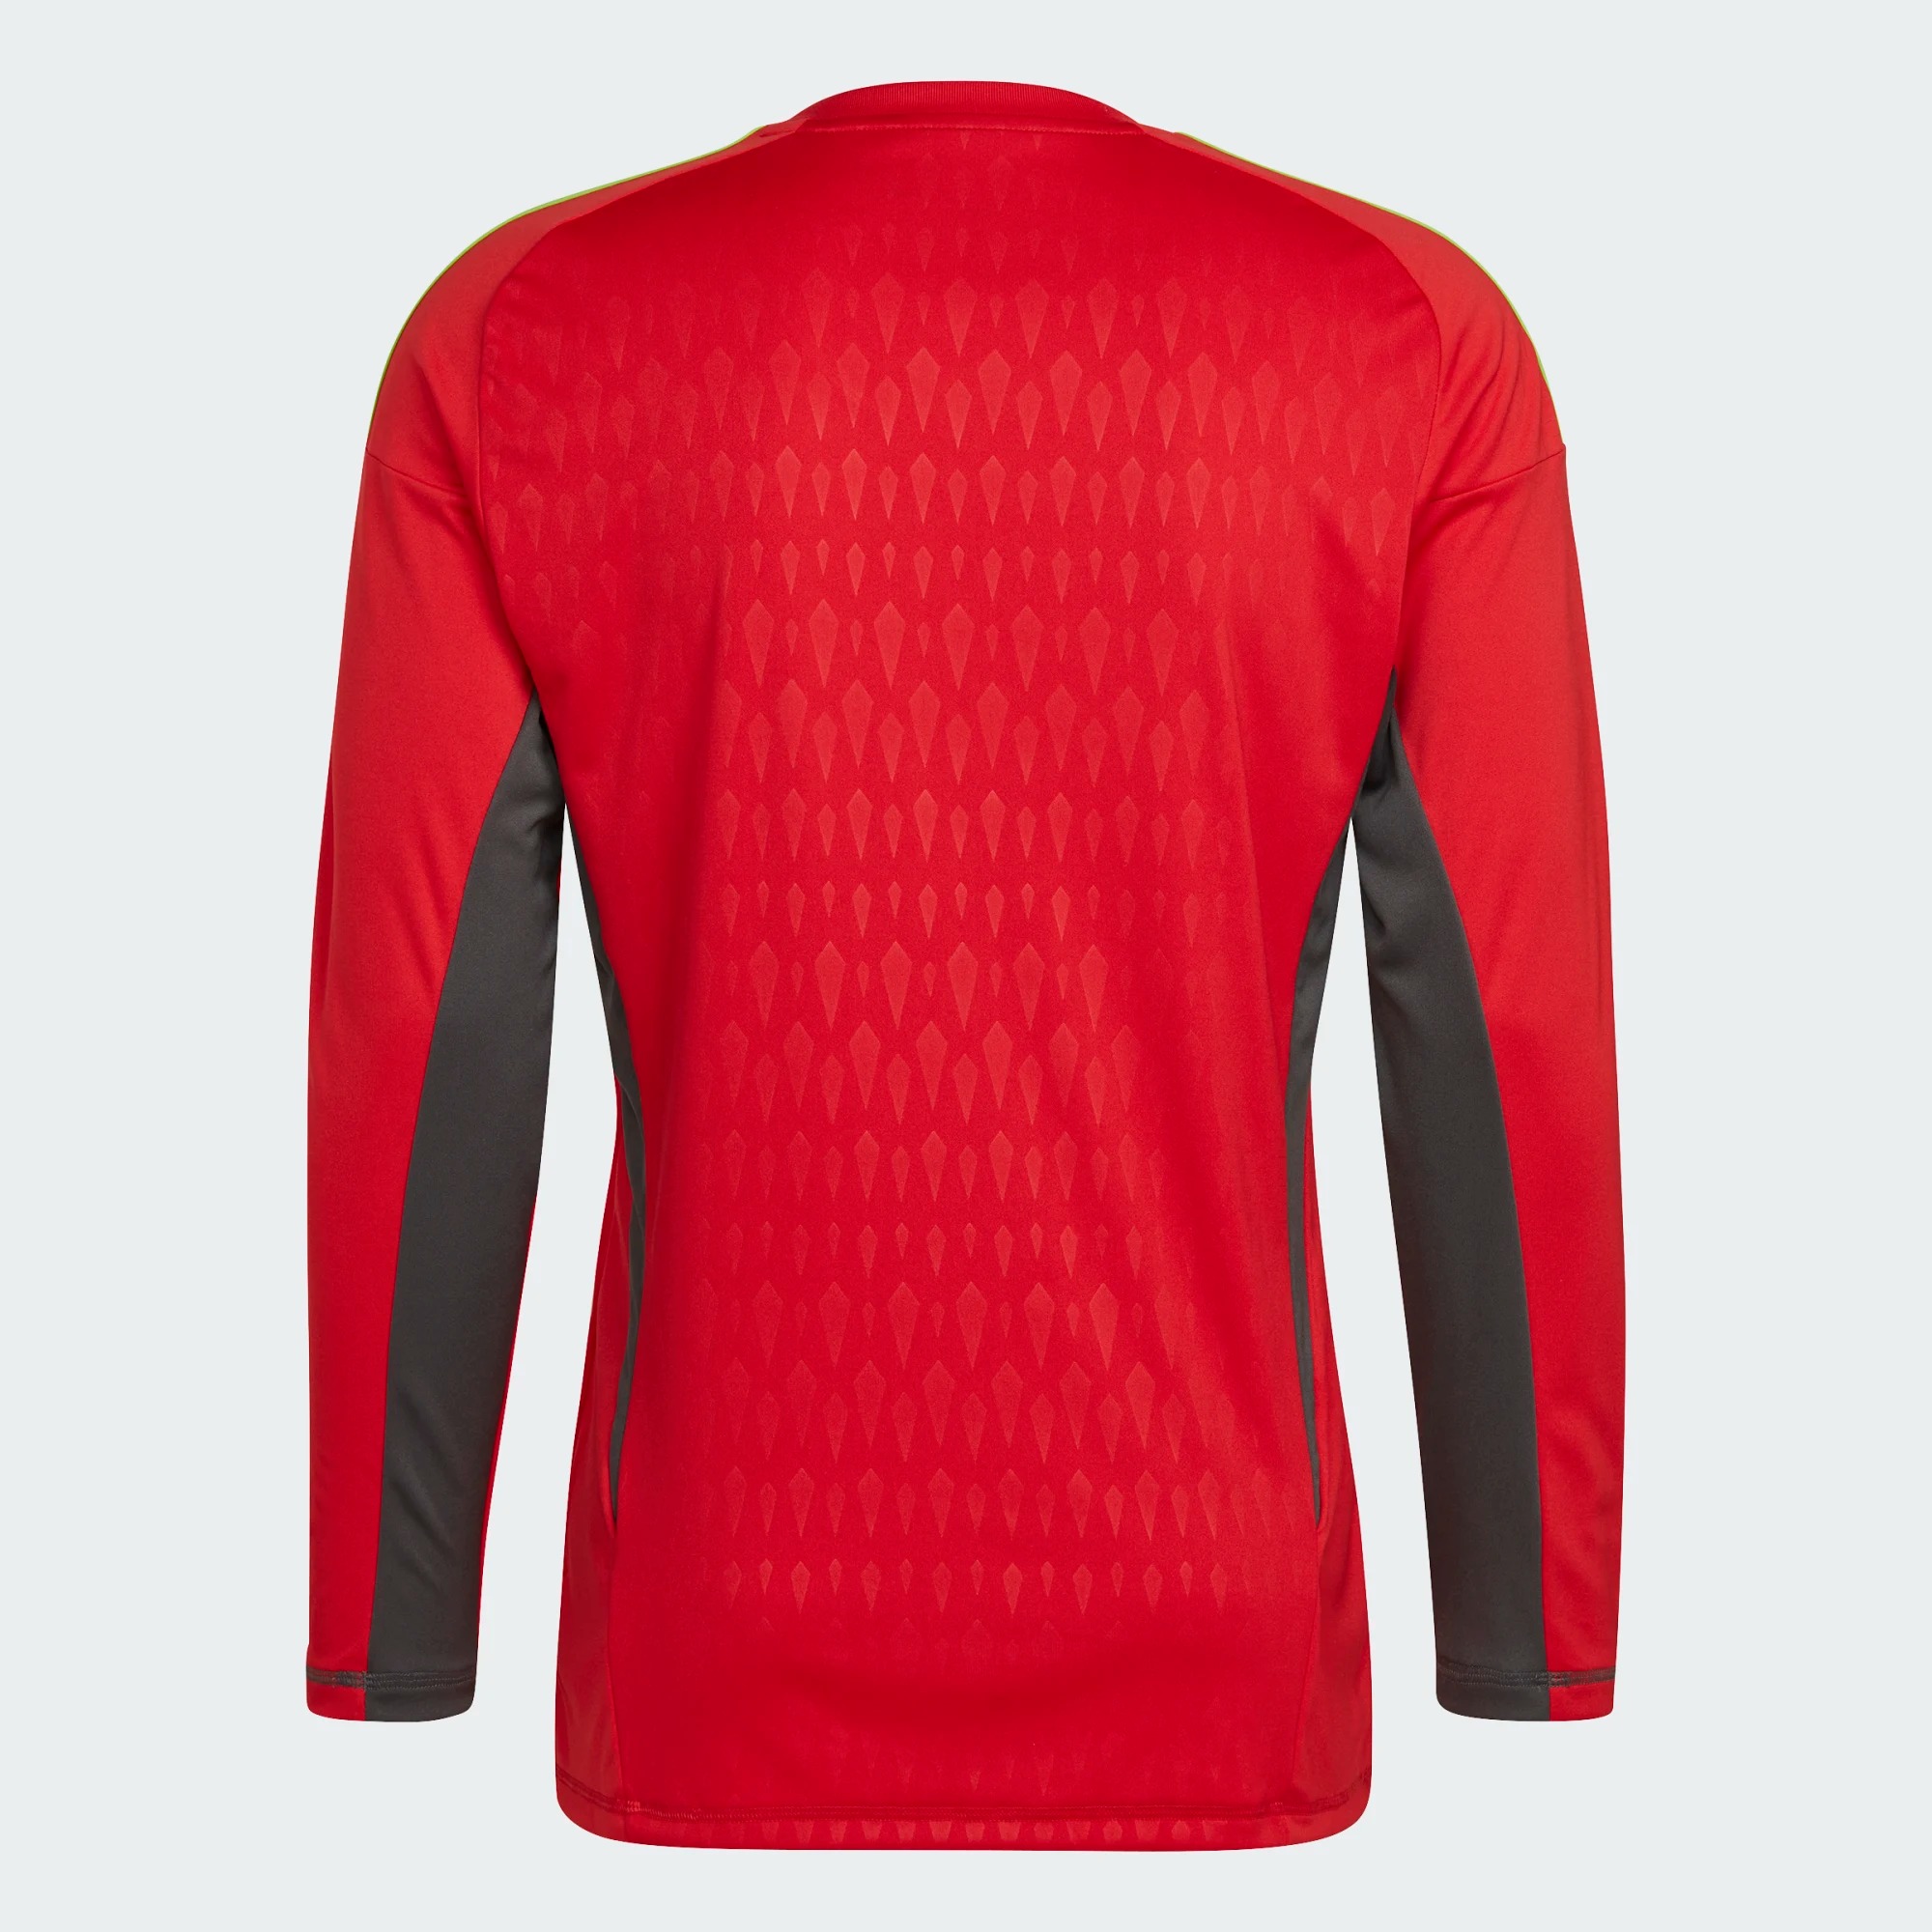 ADIDAS T23 COMPETITION GK JERSEY LS TEAM CORE RED